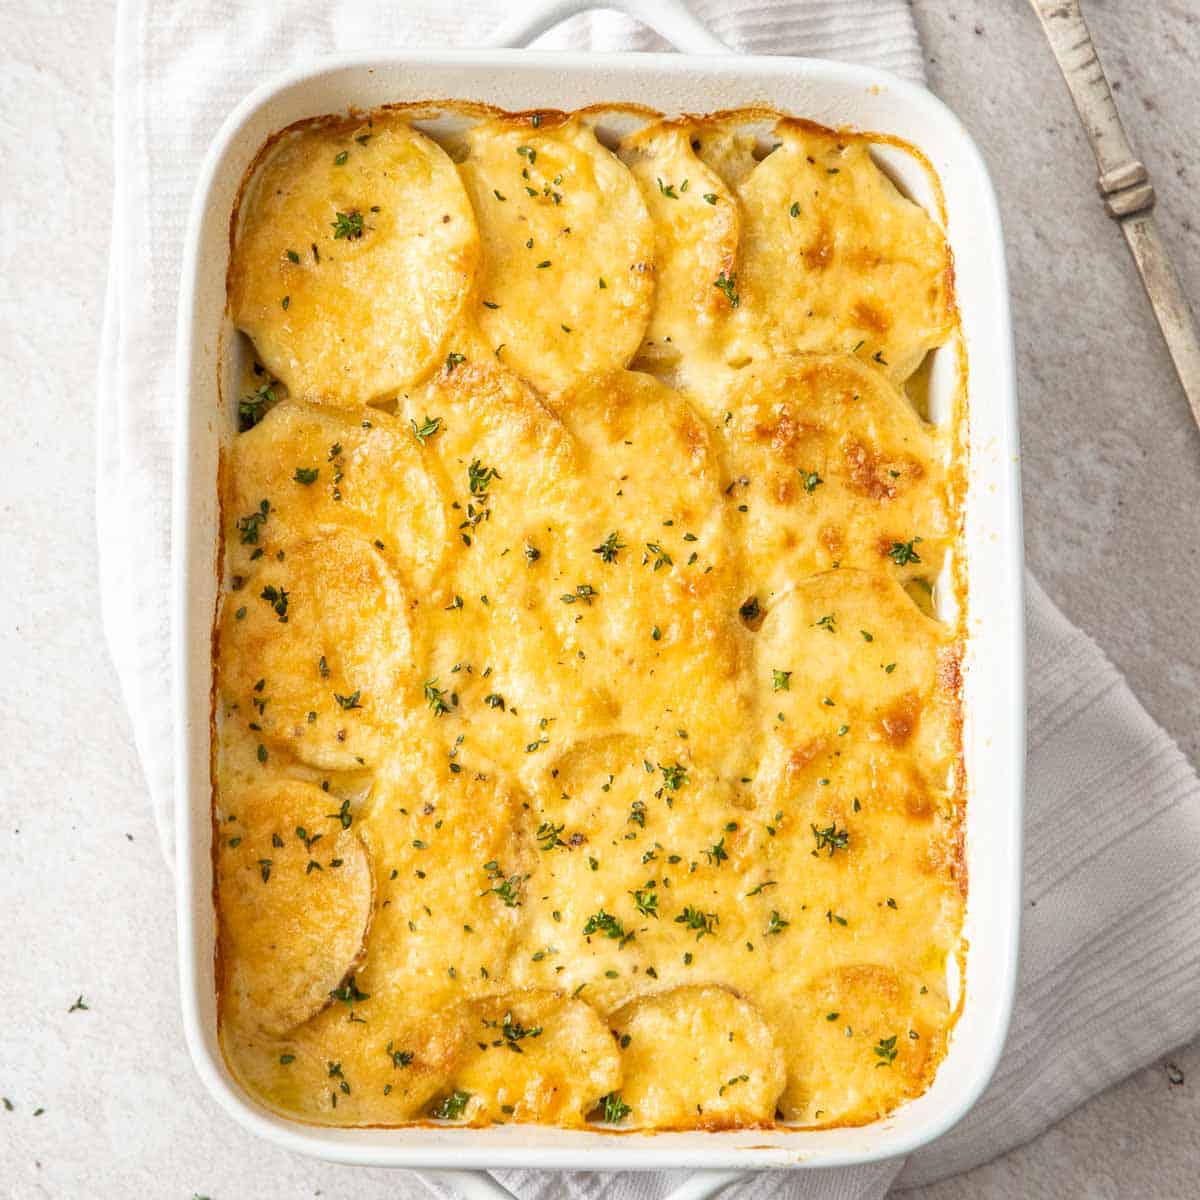 Scalloped Potatoes Recipe - Classic side dish for any holiday